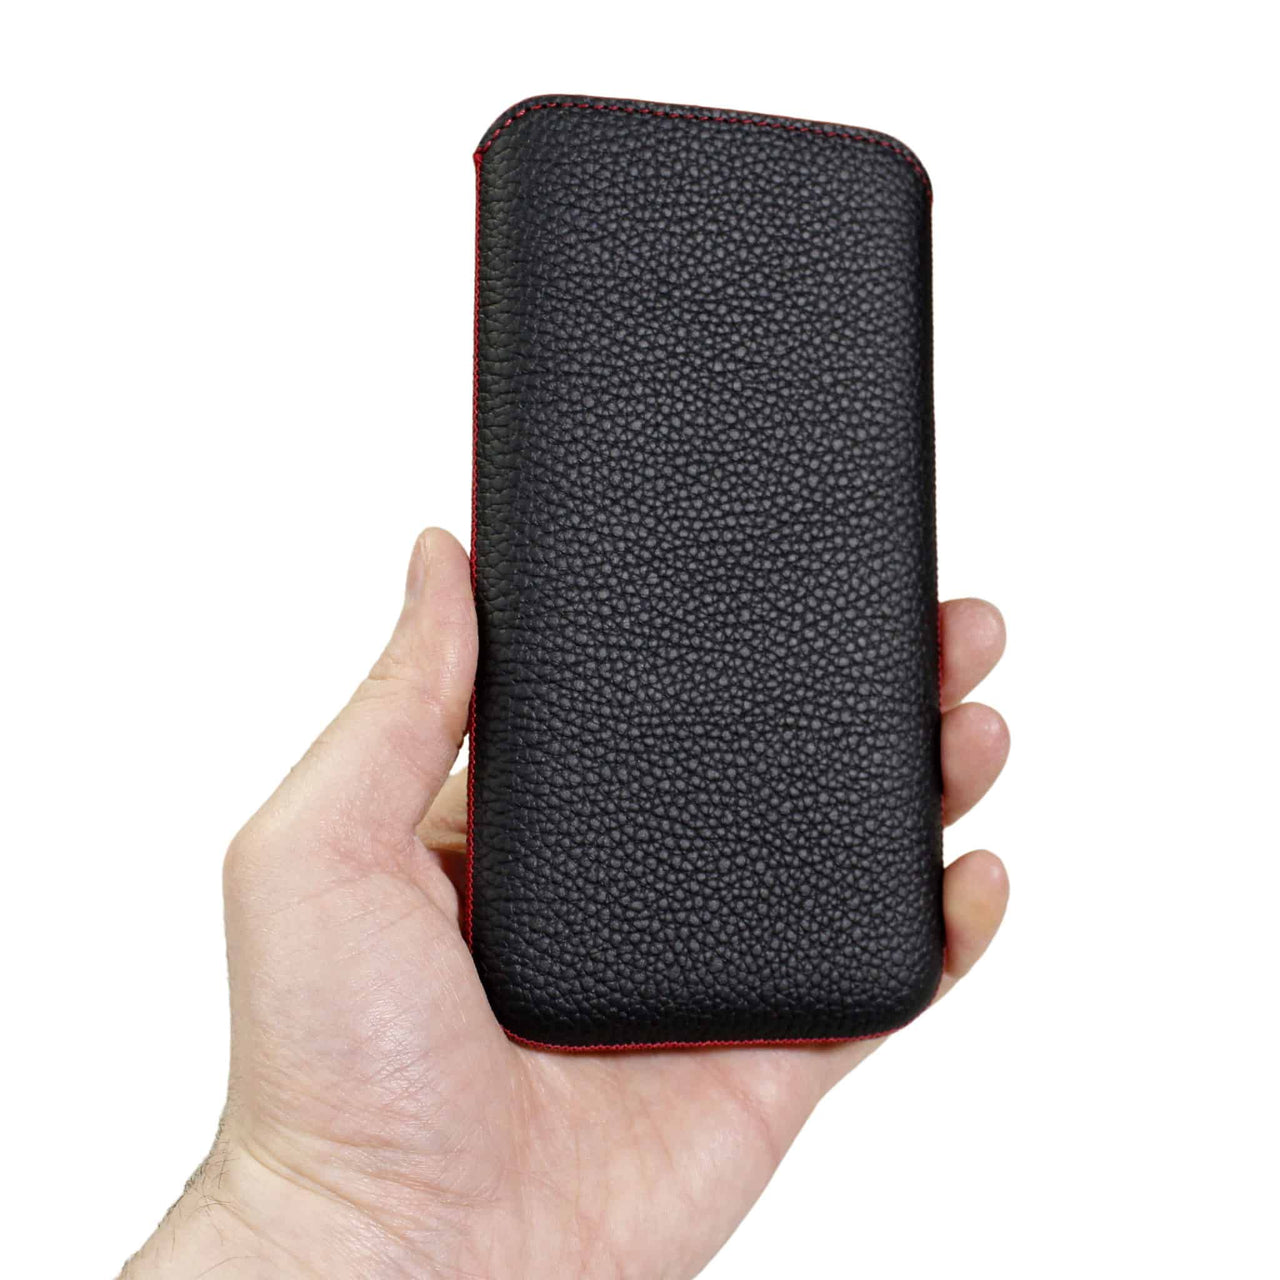 iPhone 13 Mini Genuine Leather Pouch Sleeve Case | Artisanpouch